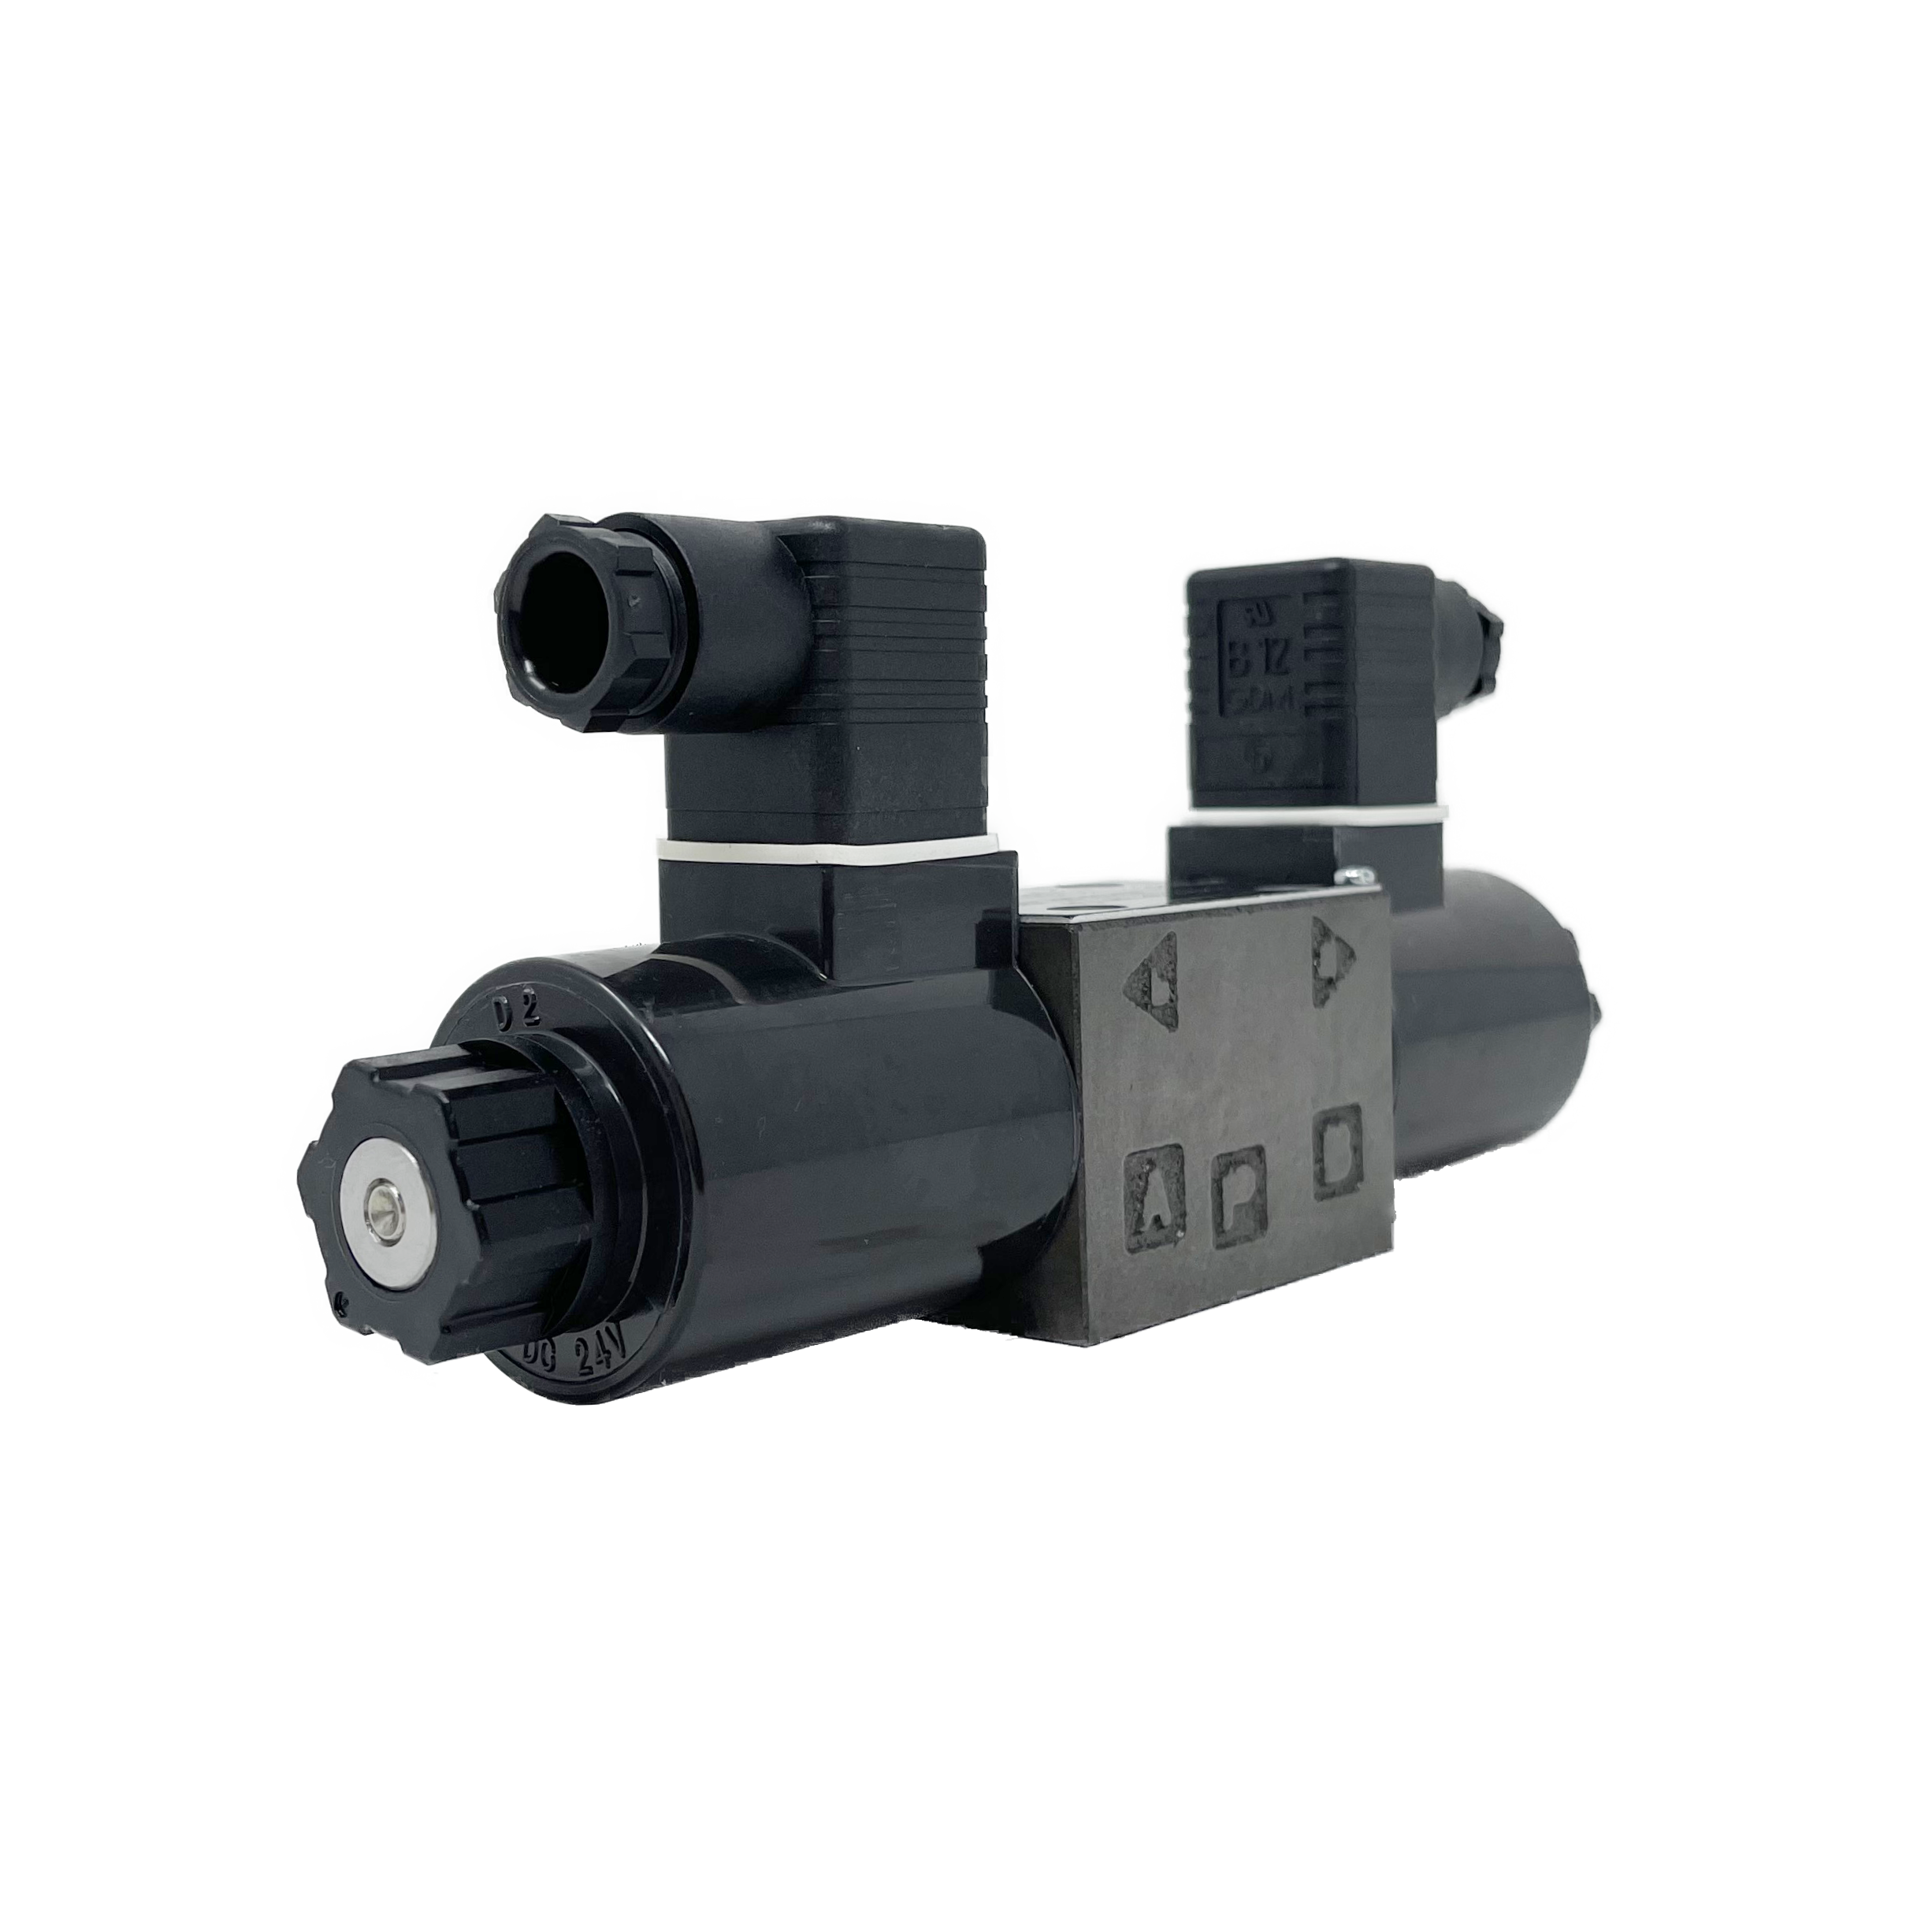 SA-G01-C5-E115-E31 : Nachi Solenoid Valve, 3P4W, D03 (NG6), 26.4GPM, 5075psi, All Ports Blocked Neutral, 115 VAC, DIN with built-in rectifier